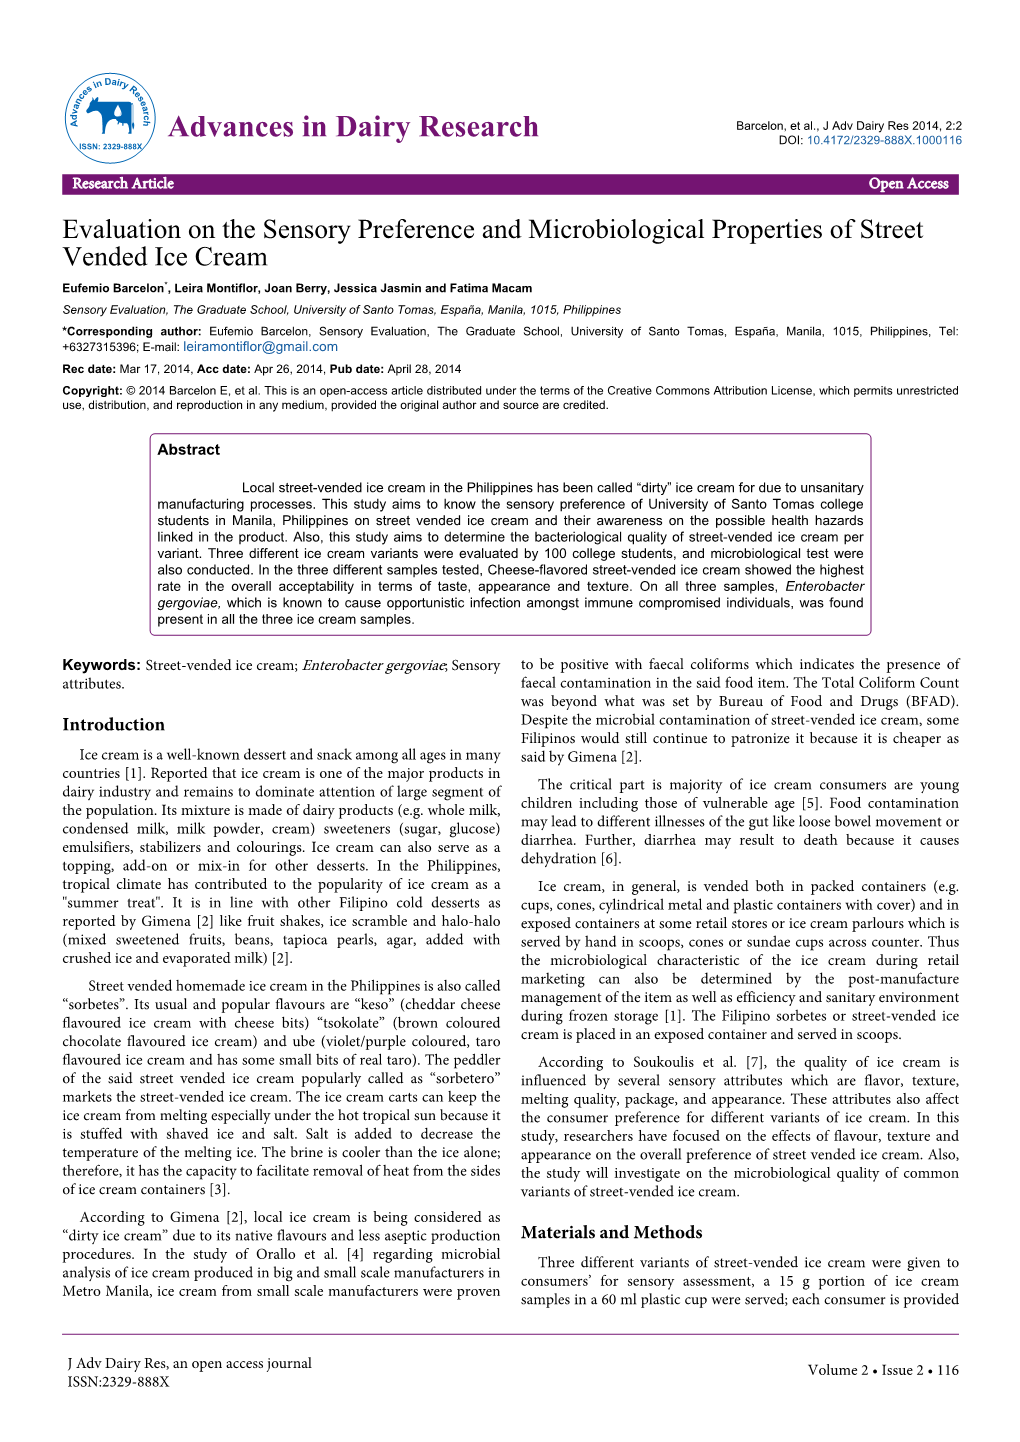 Evaluation on the Sensory Preference and Microbiological Properties Of